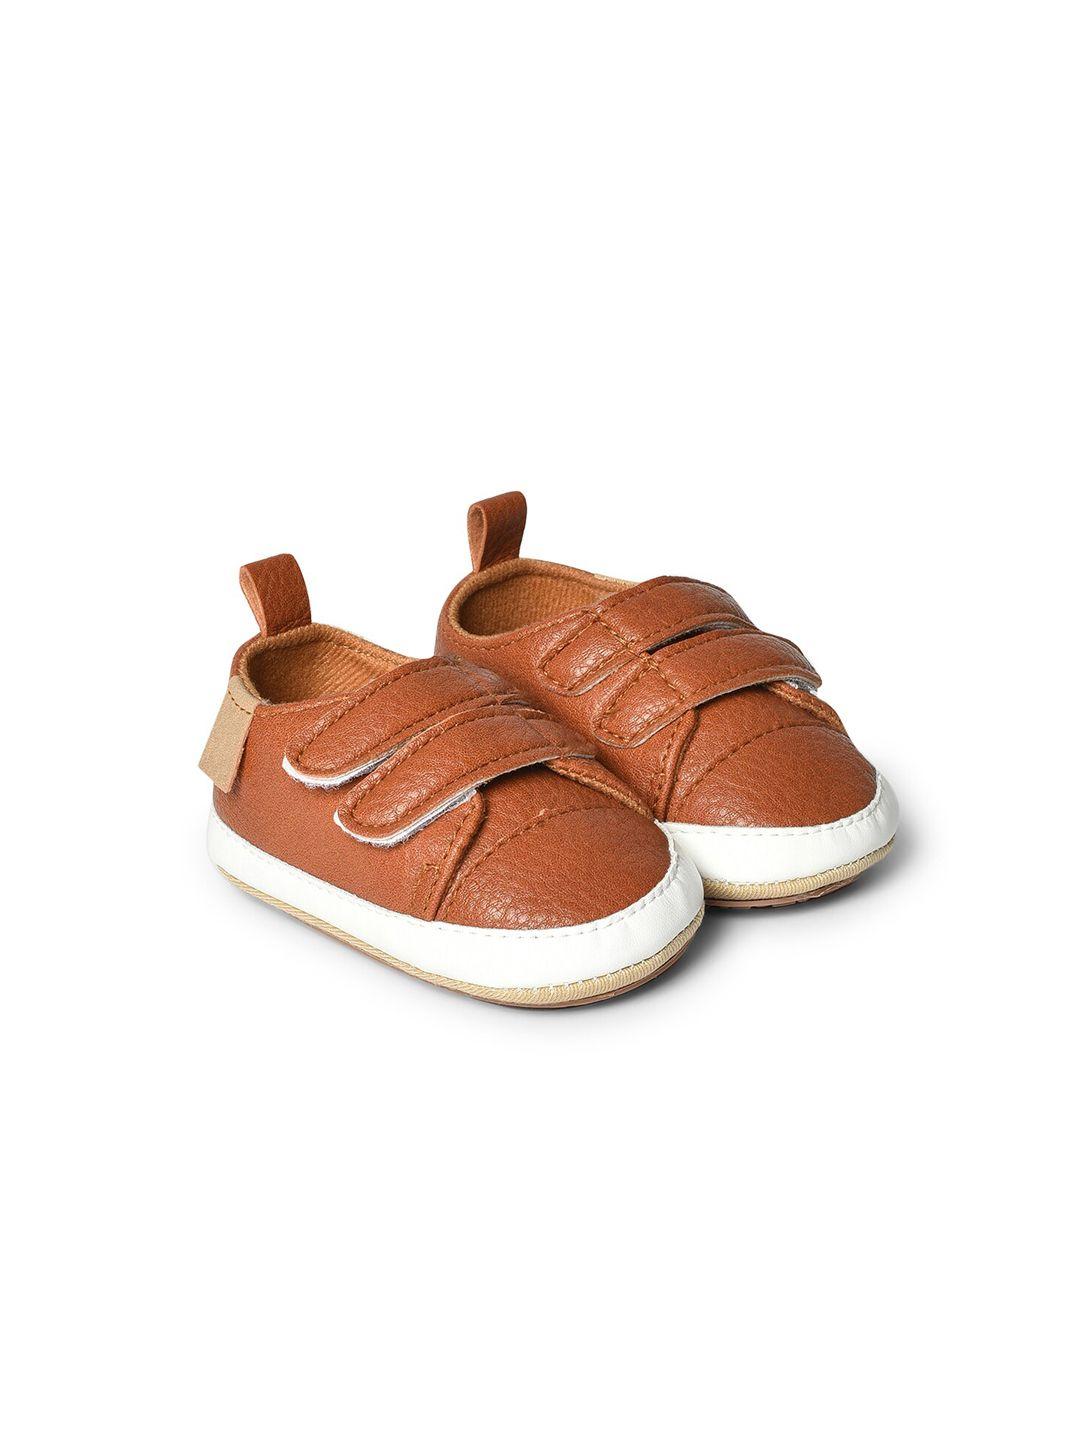 miarcus infants  brown woven design leather sneakers